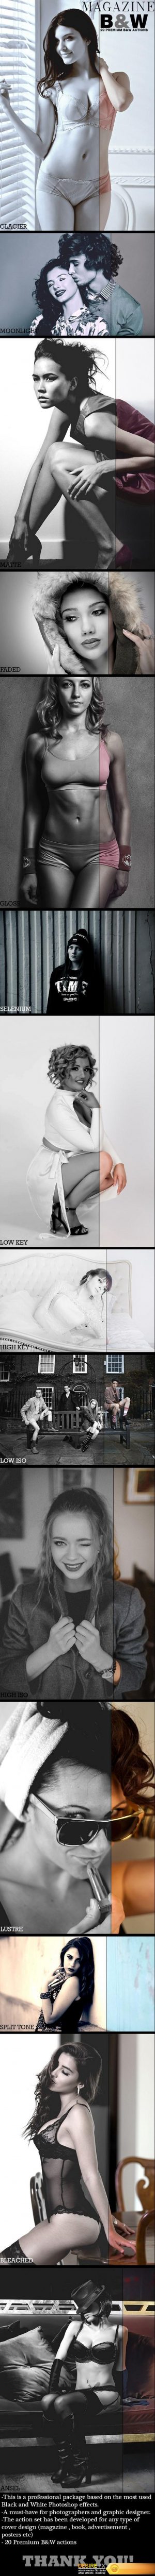 Graphicriver 20073760 – Magazine B&W PS Actions-20 Actions